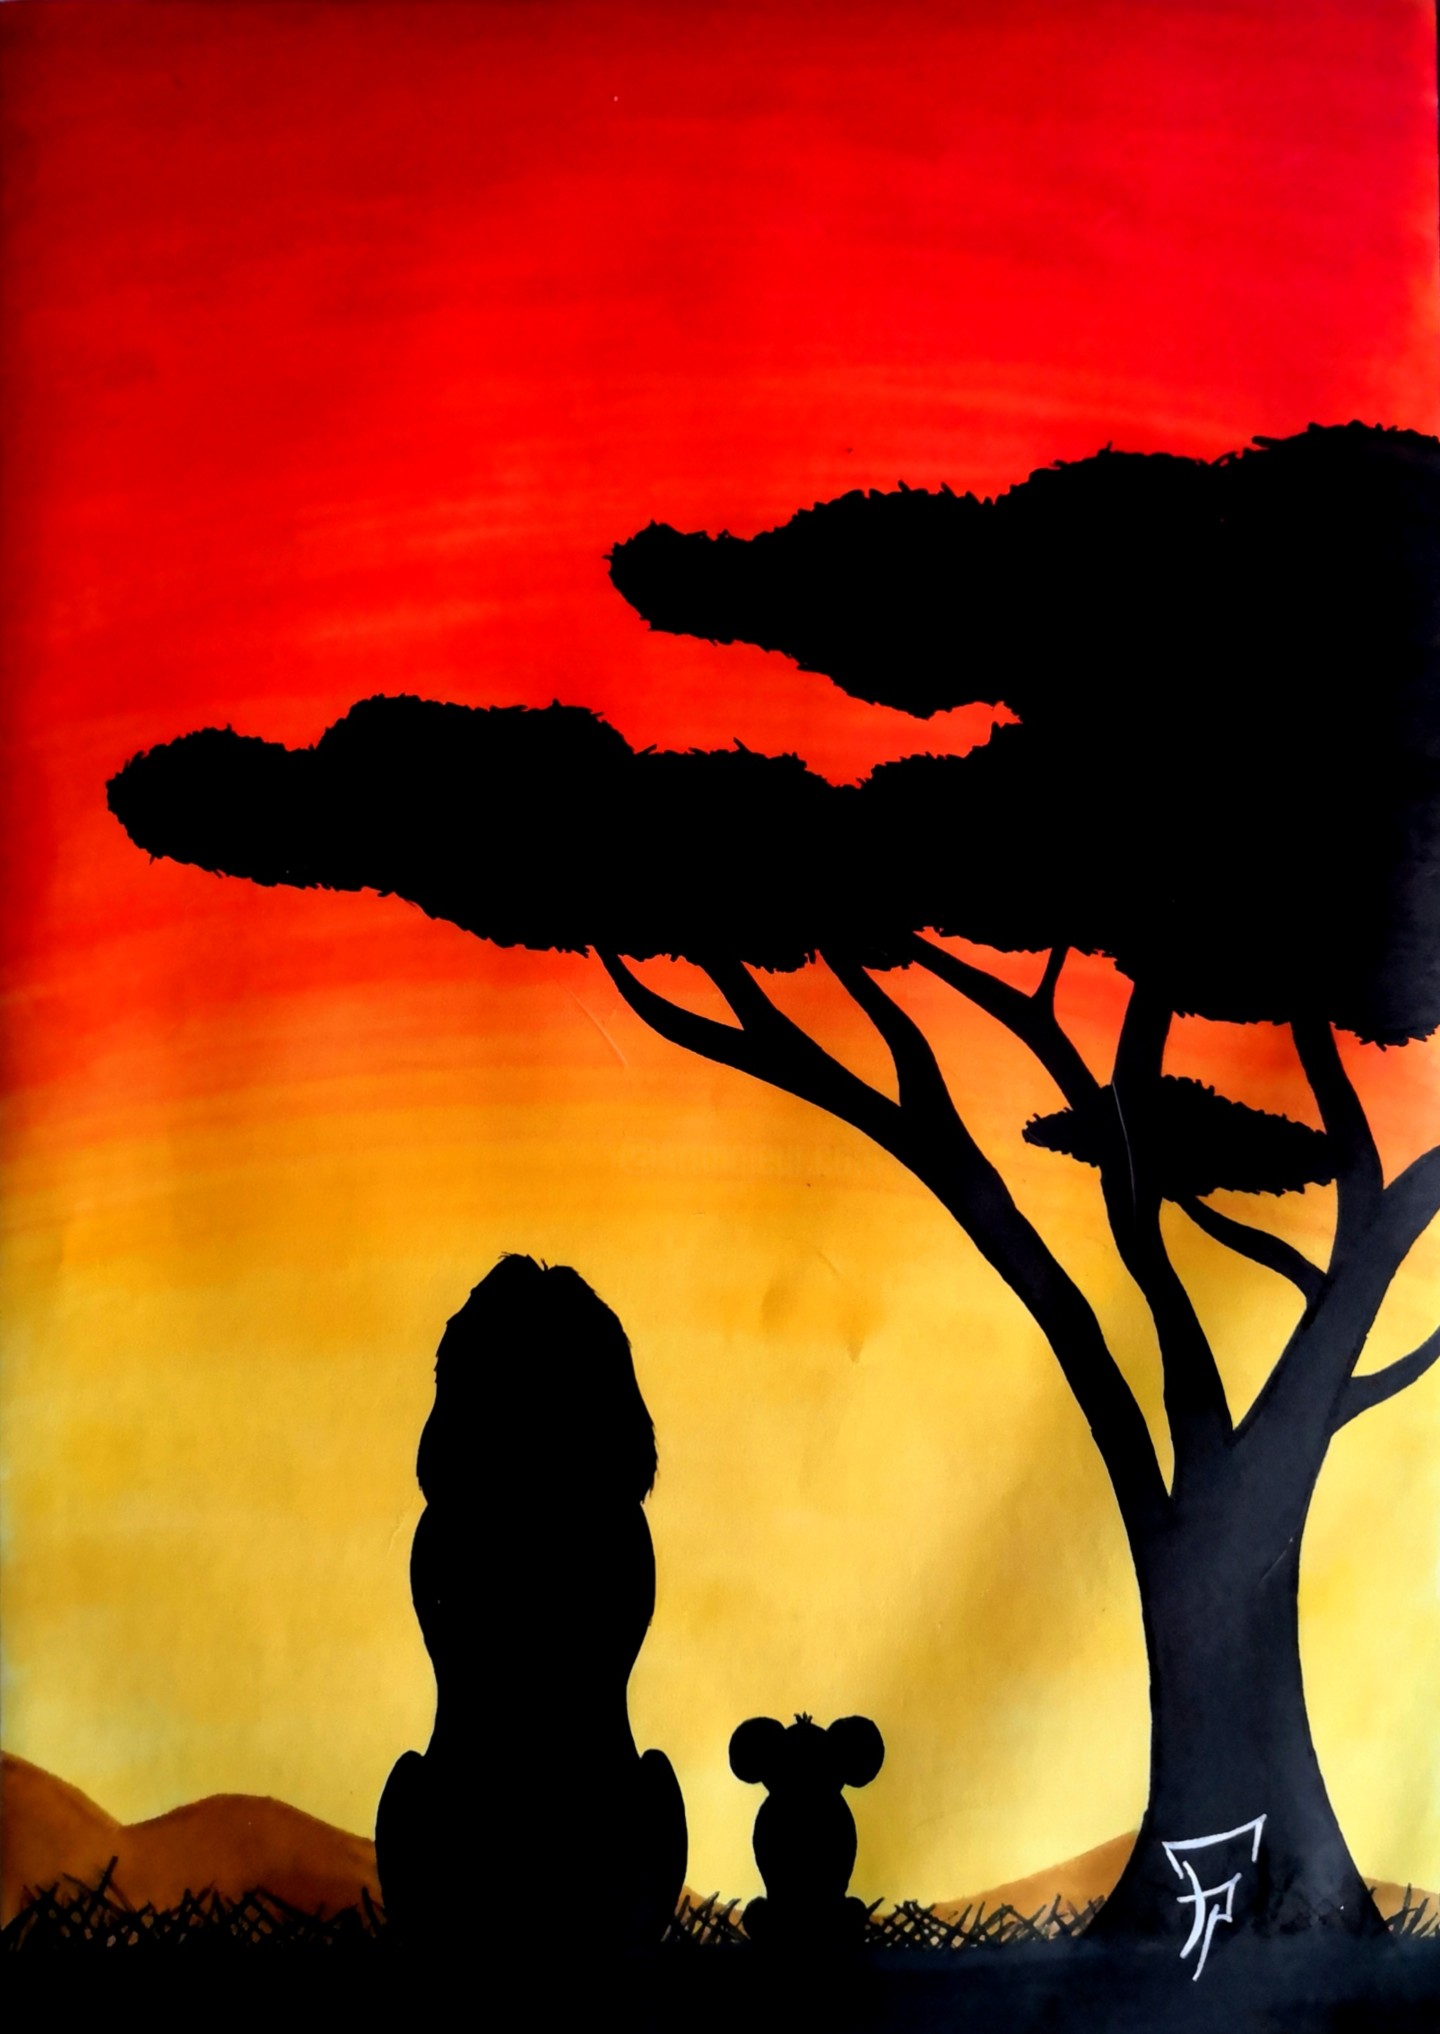 lion king silhouette painting